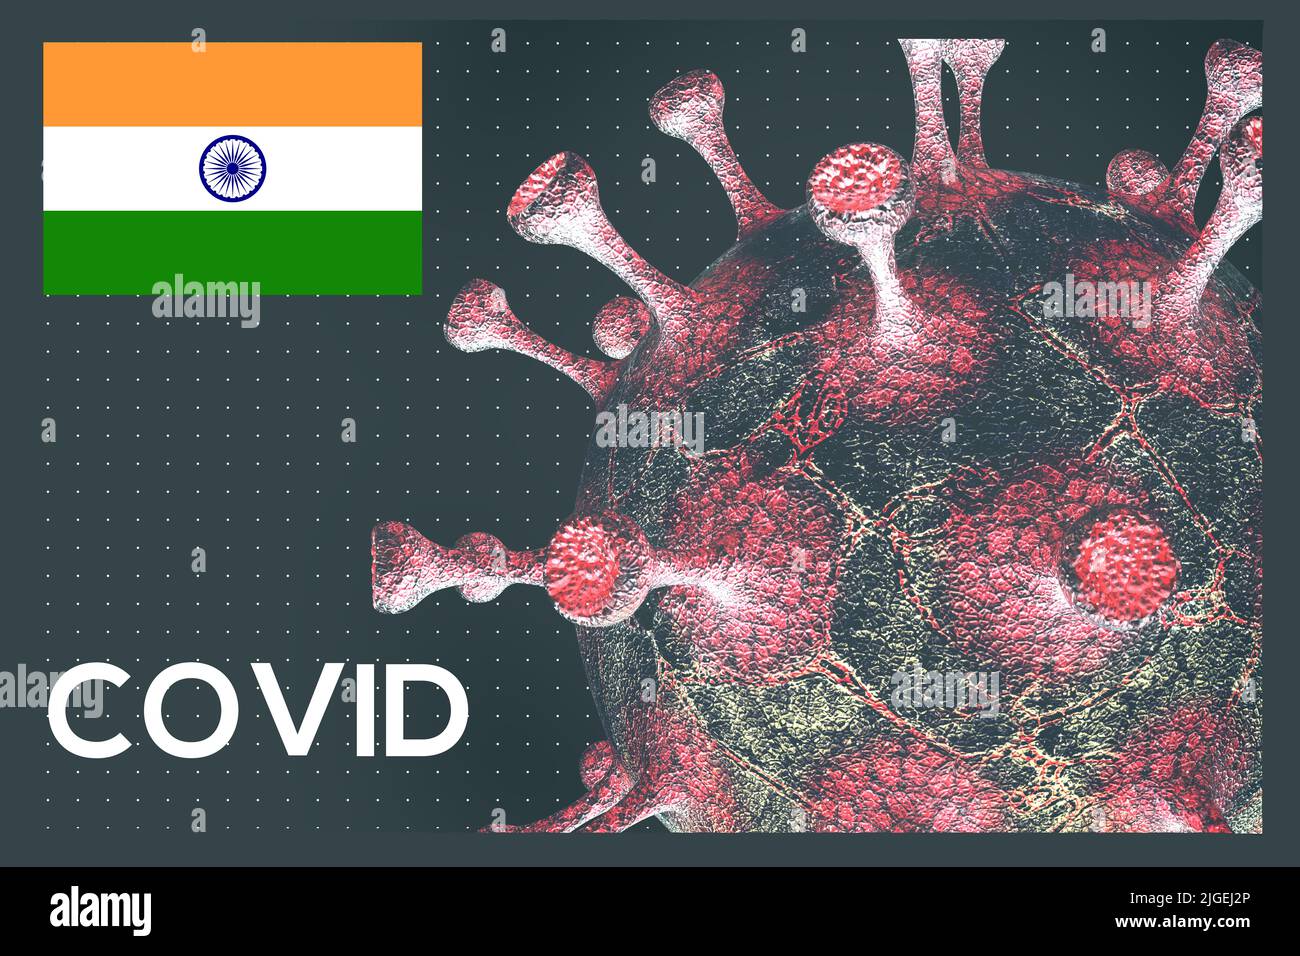 COVID-19 pandemic, COVID 2022 restart COVID in India 2022, Flag India on background coronavirus, 3D work and 3D image Stock Photo